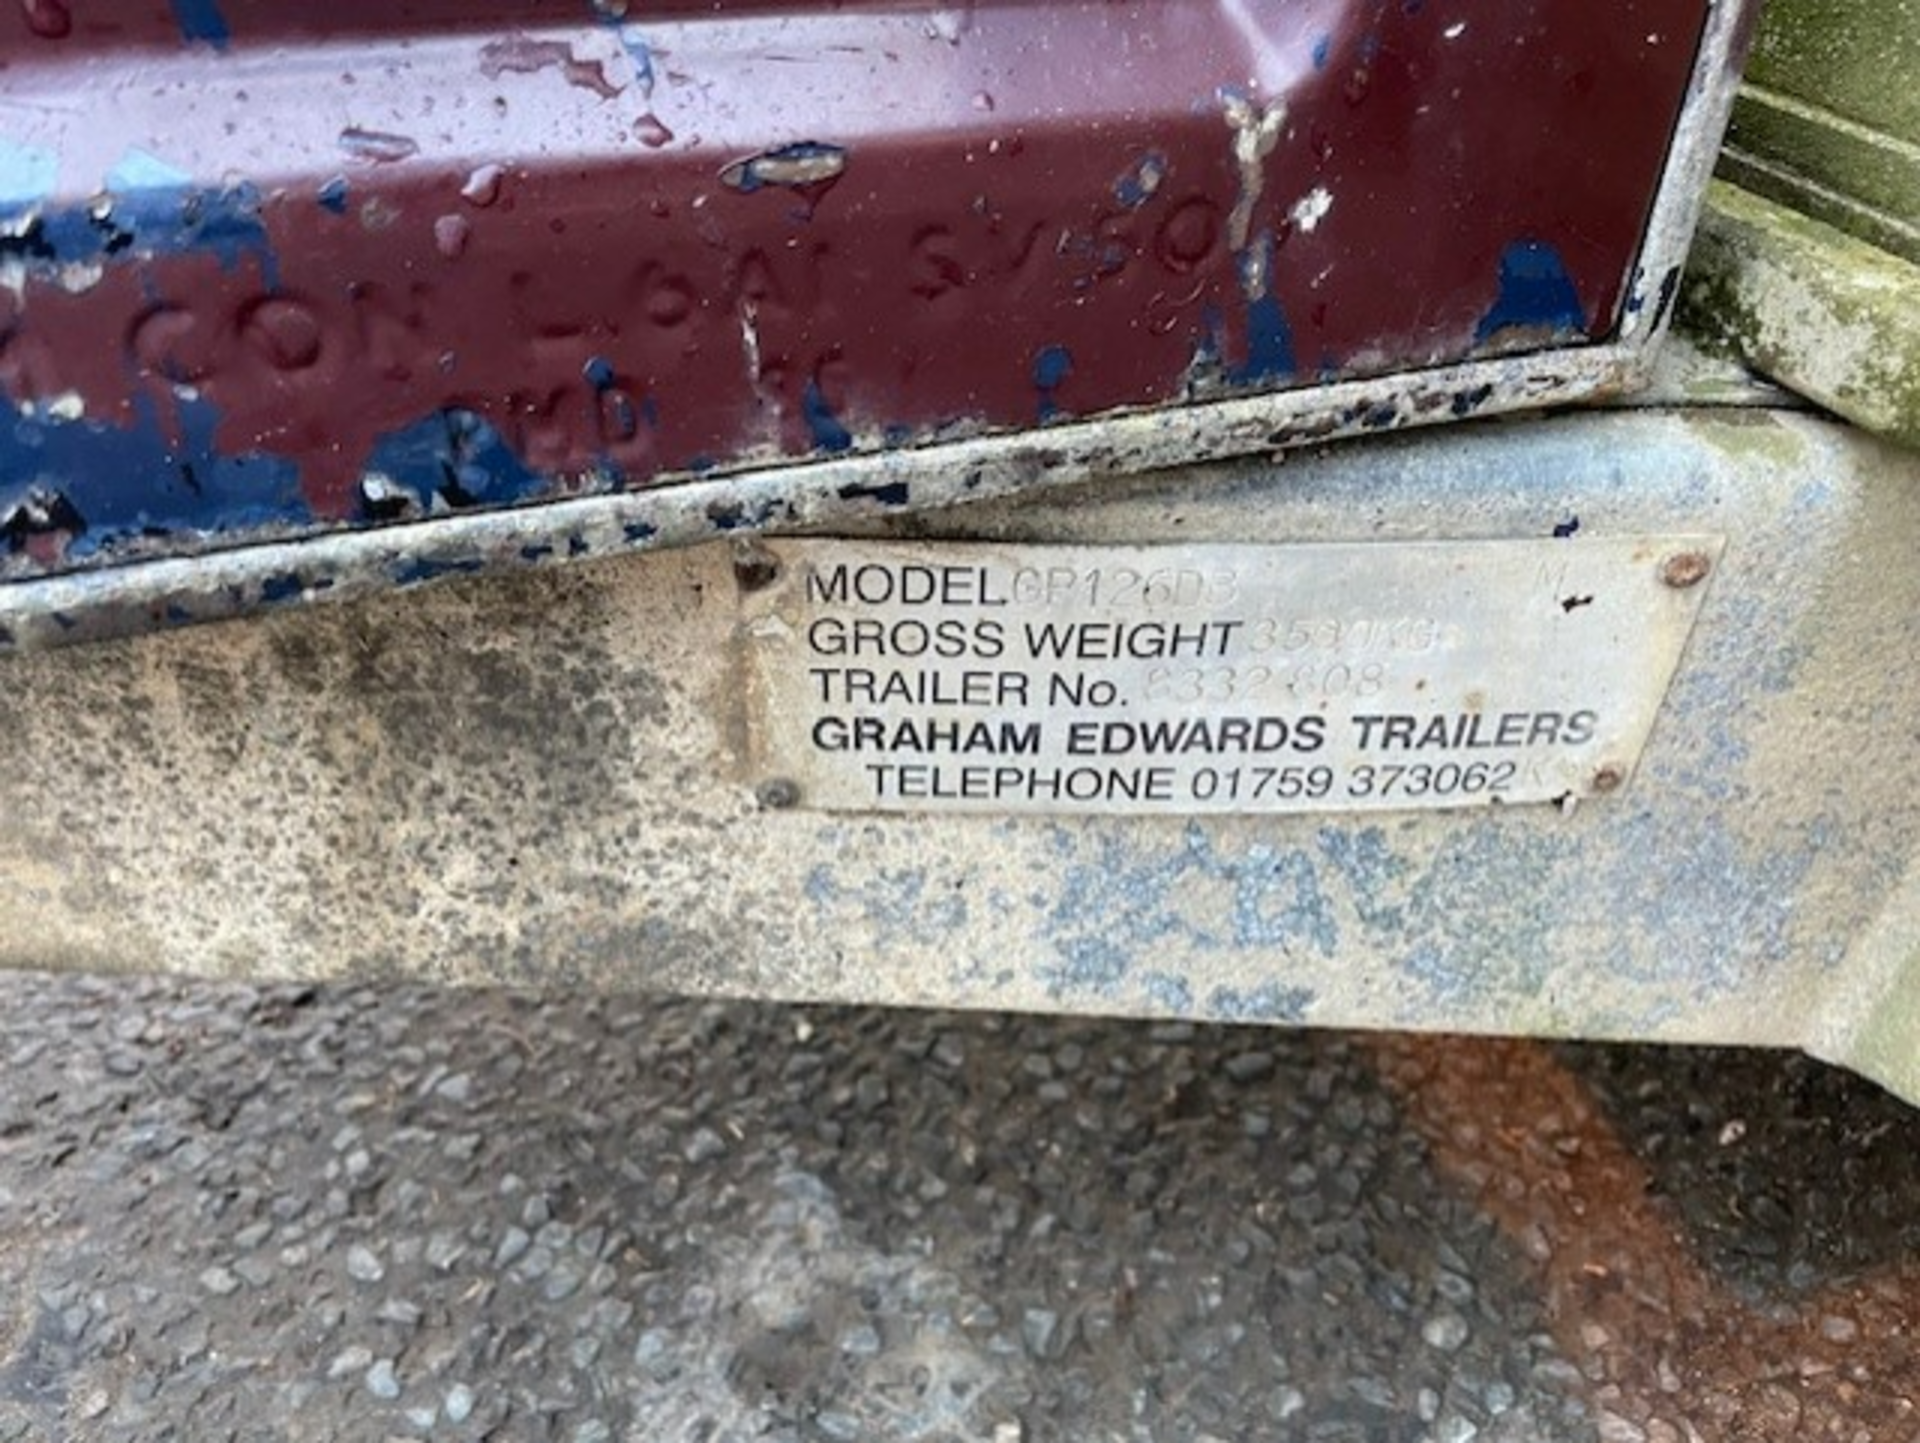 Graham Edwards Twin Wheeled Fencing Trailer 3.7m x 1.8m 3500kg good strong trailer been used as a - Image 6 of 7